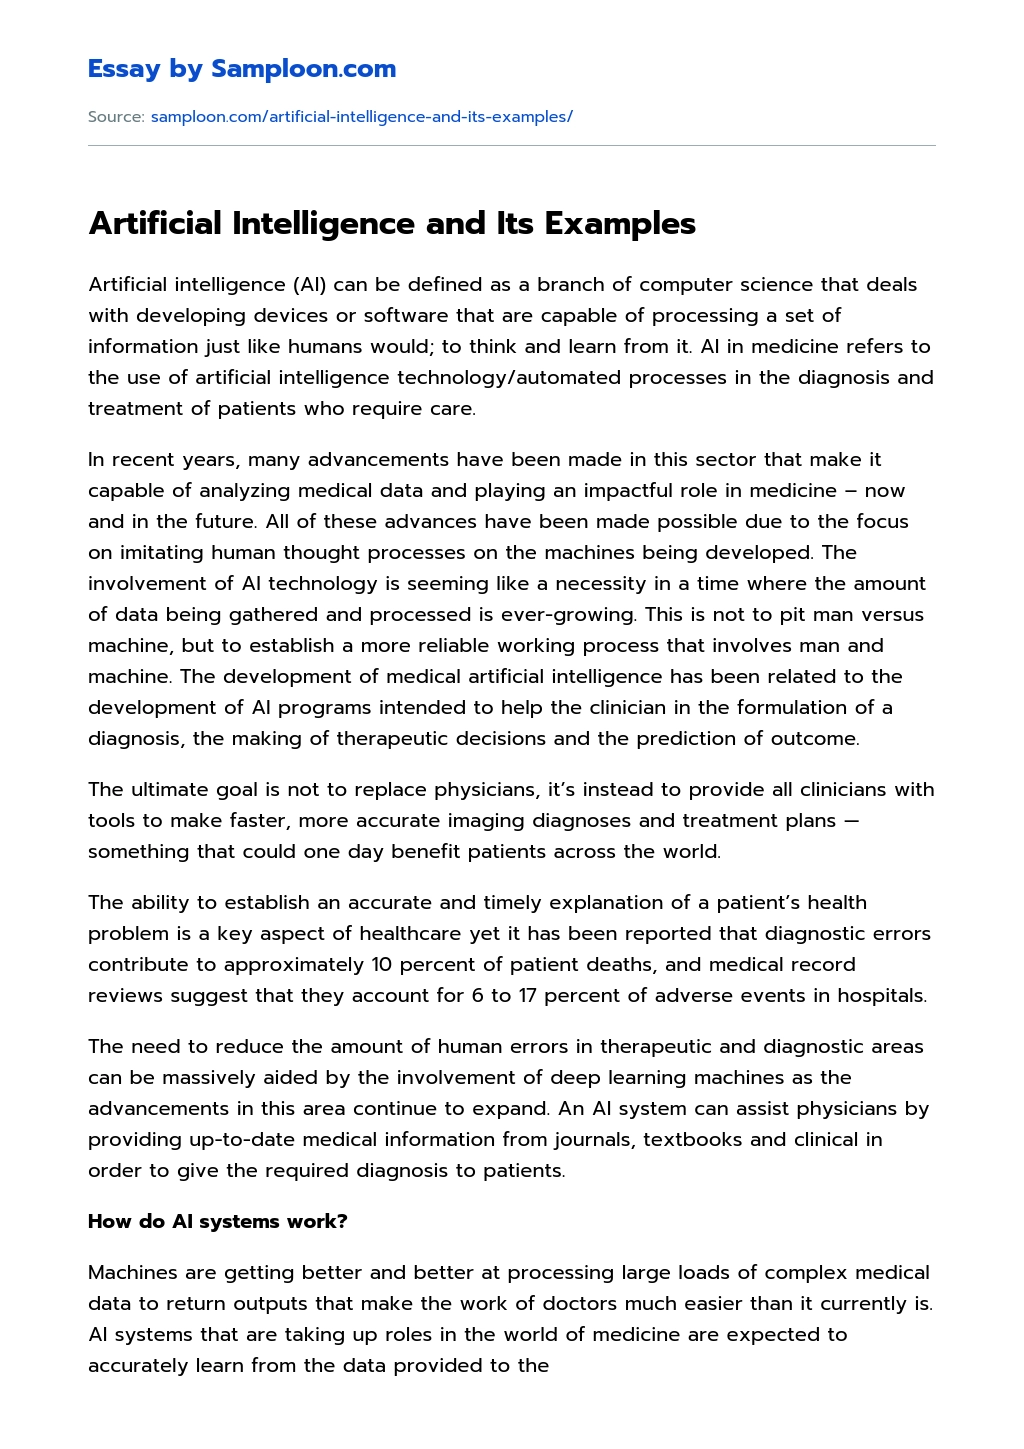 Artificial Intelligence and Its Examples essay